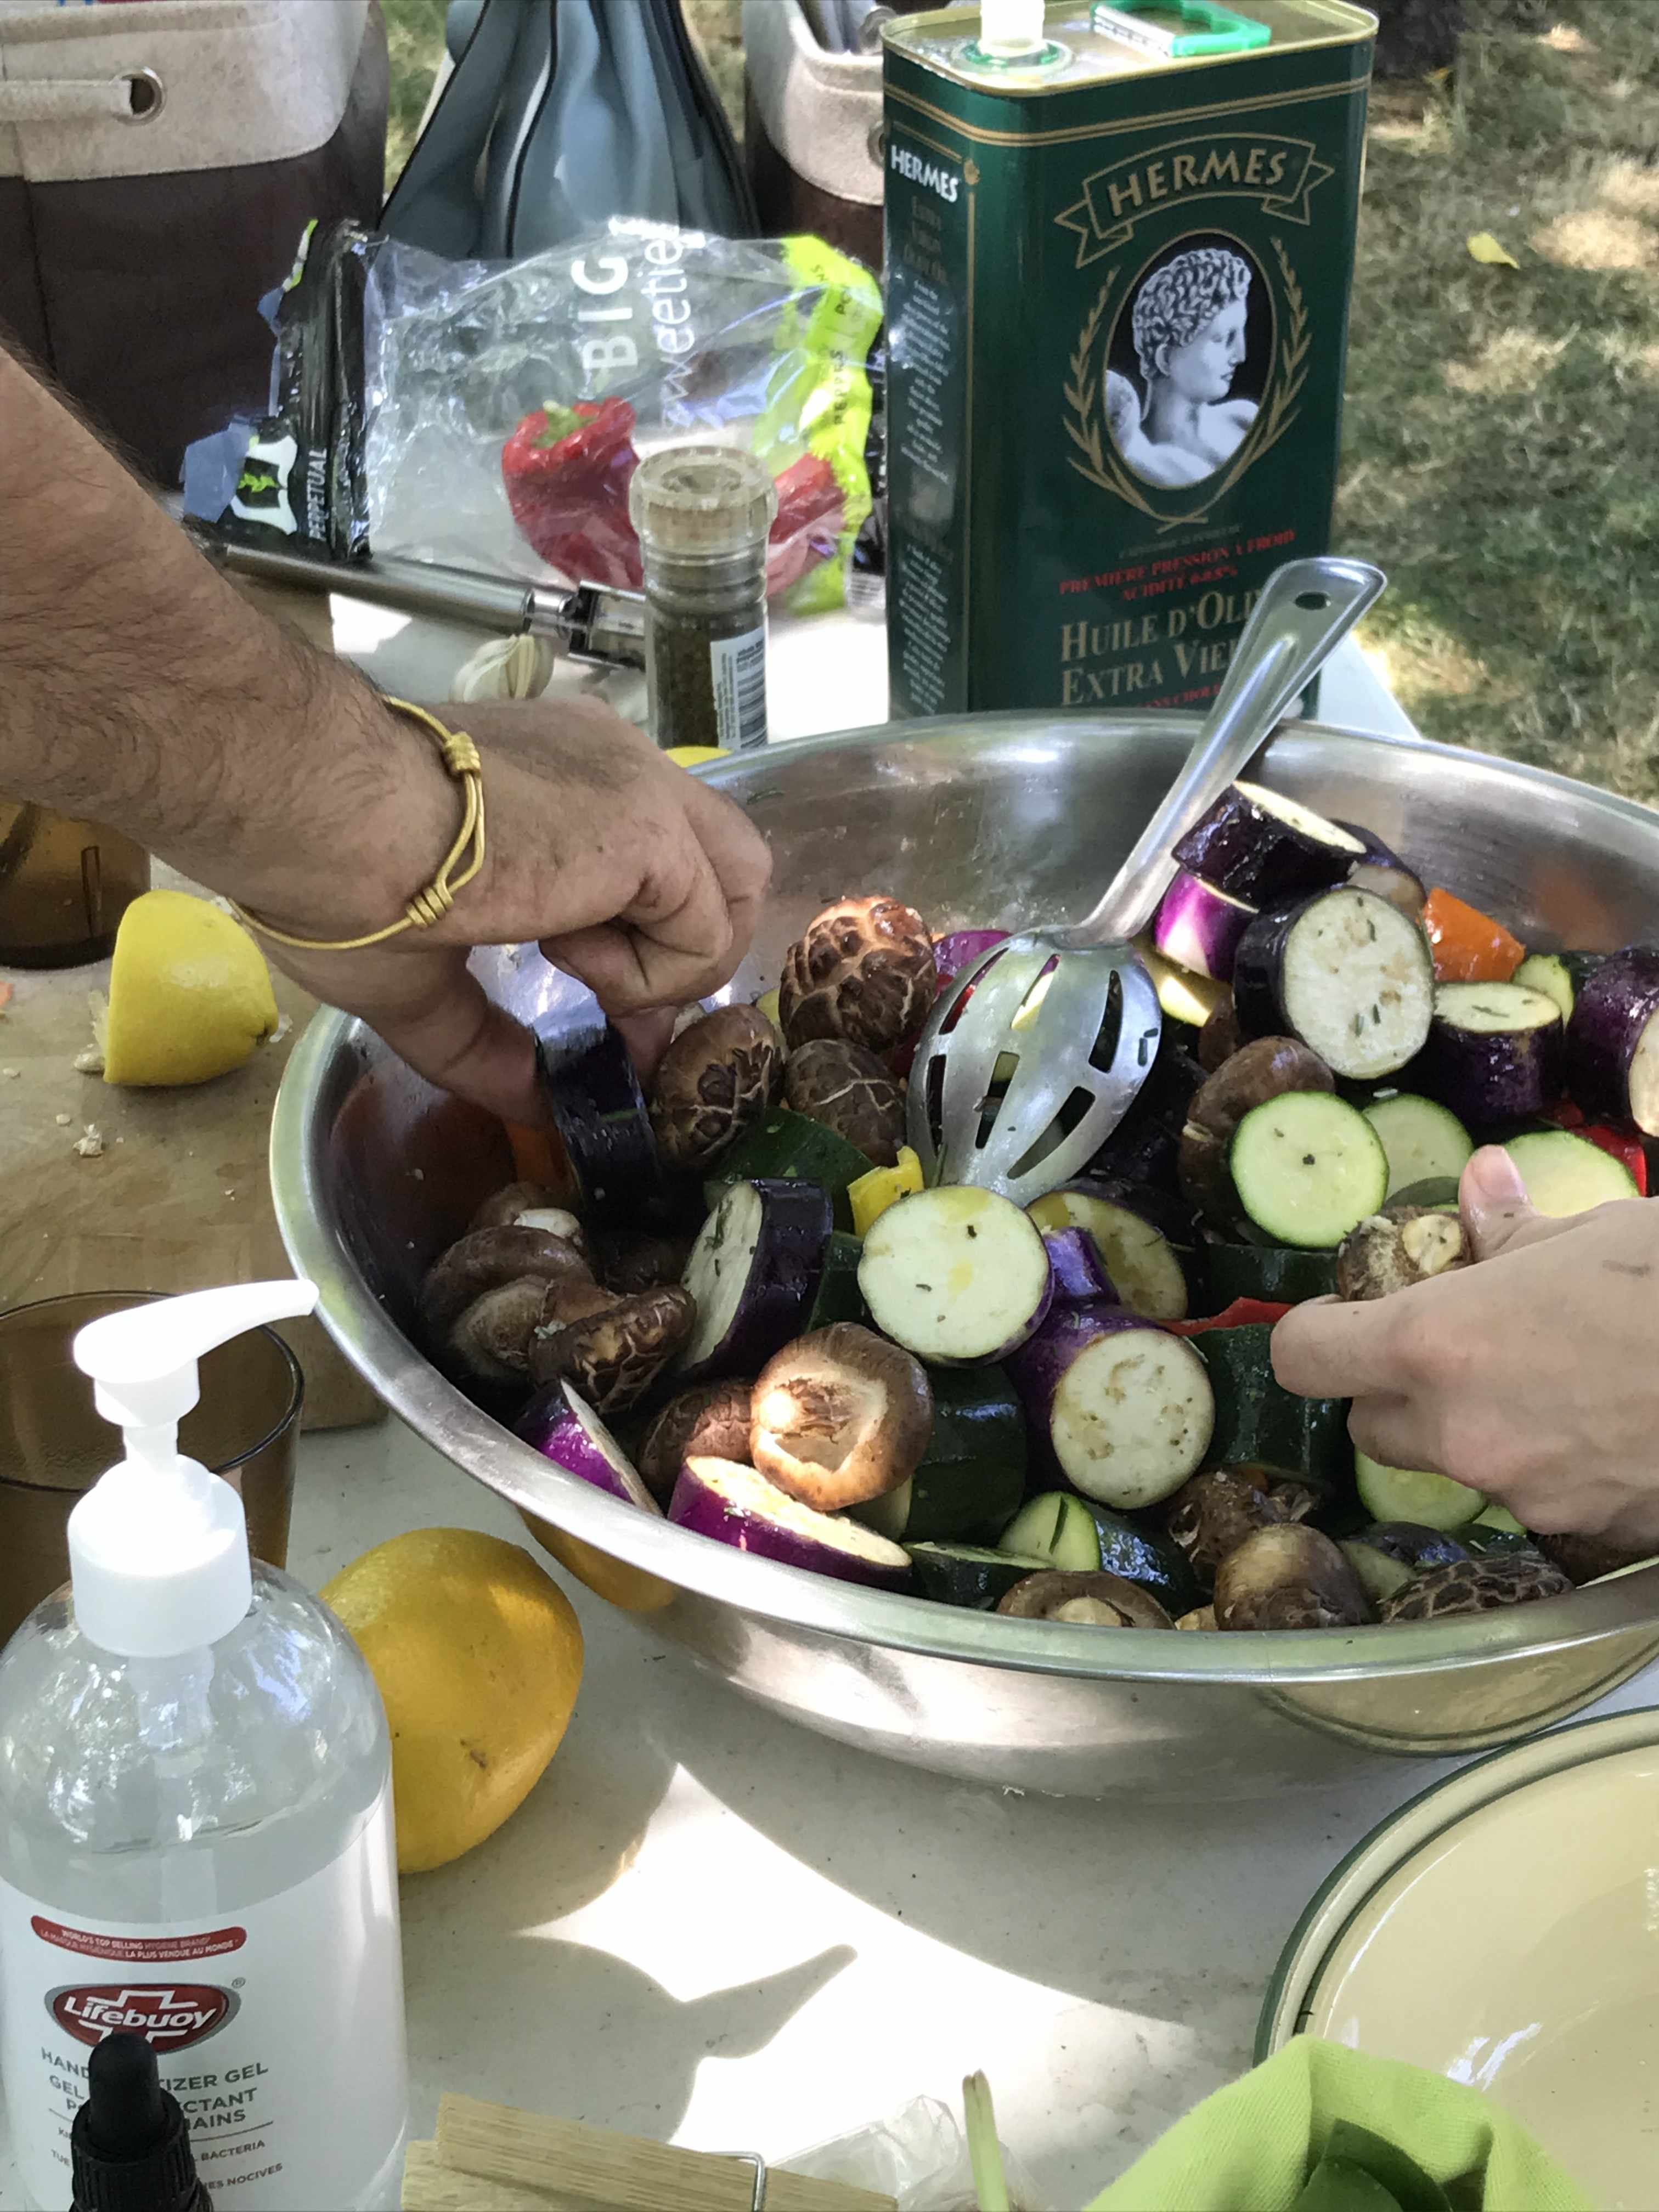 large bowl of marinated vegitables, seasoned for the shish kebabs, on a table. on the table is hand sanitizer, lemons, peppers, black pepper, a tin of olive oil, and two hands are reaching into the bowl to take the fruit.